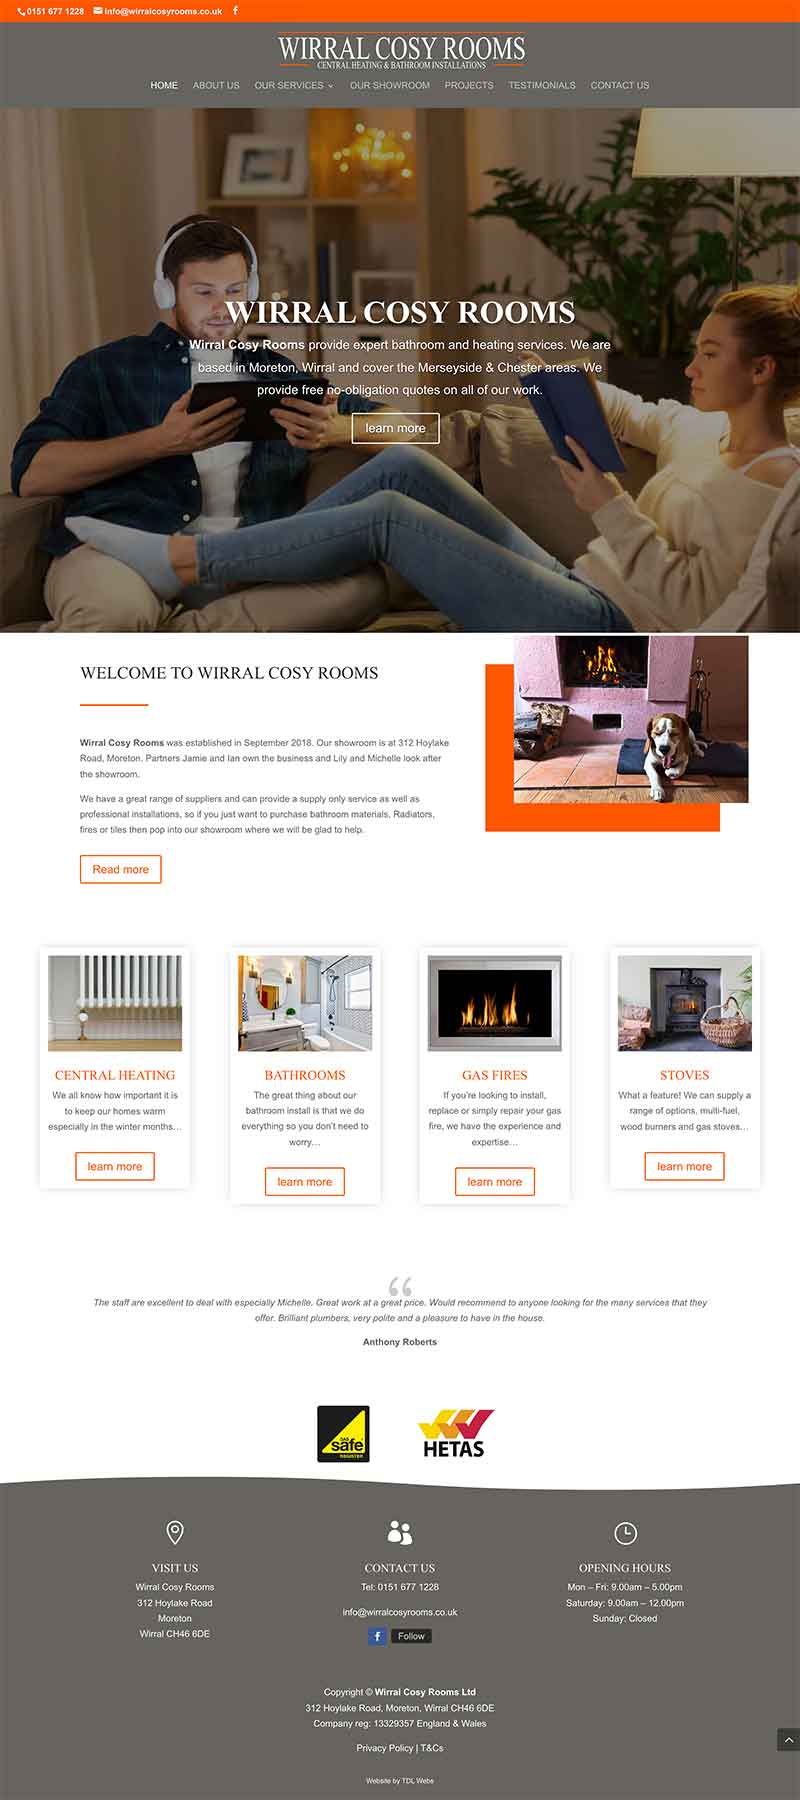 Full length screenshot of the Wirral Cosy Rooms home page